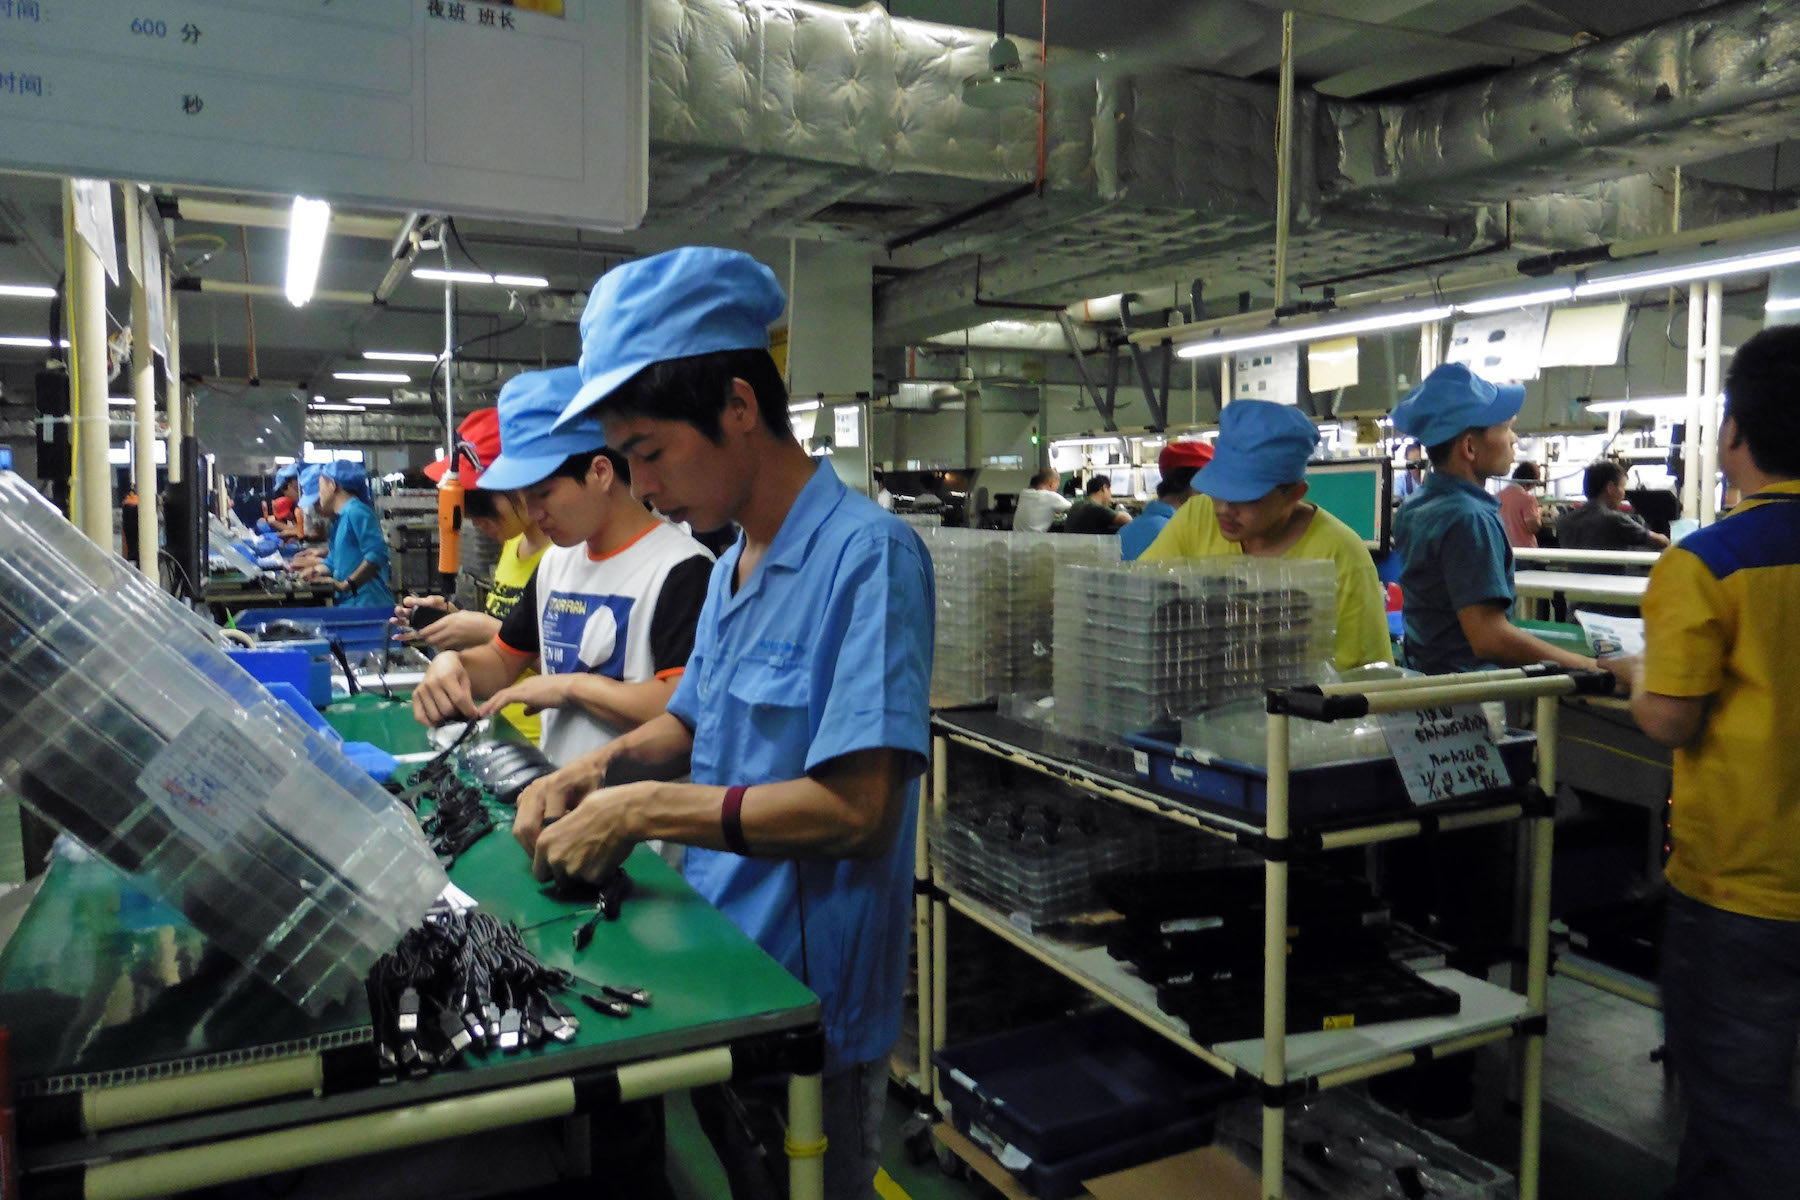 Workers assemble electronics by hand at a factory in China.